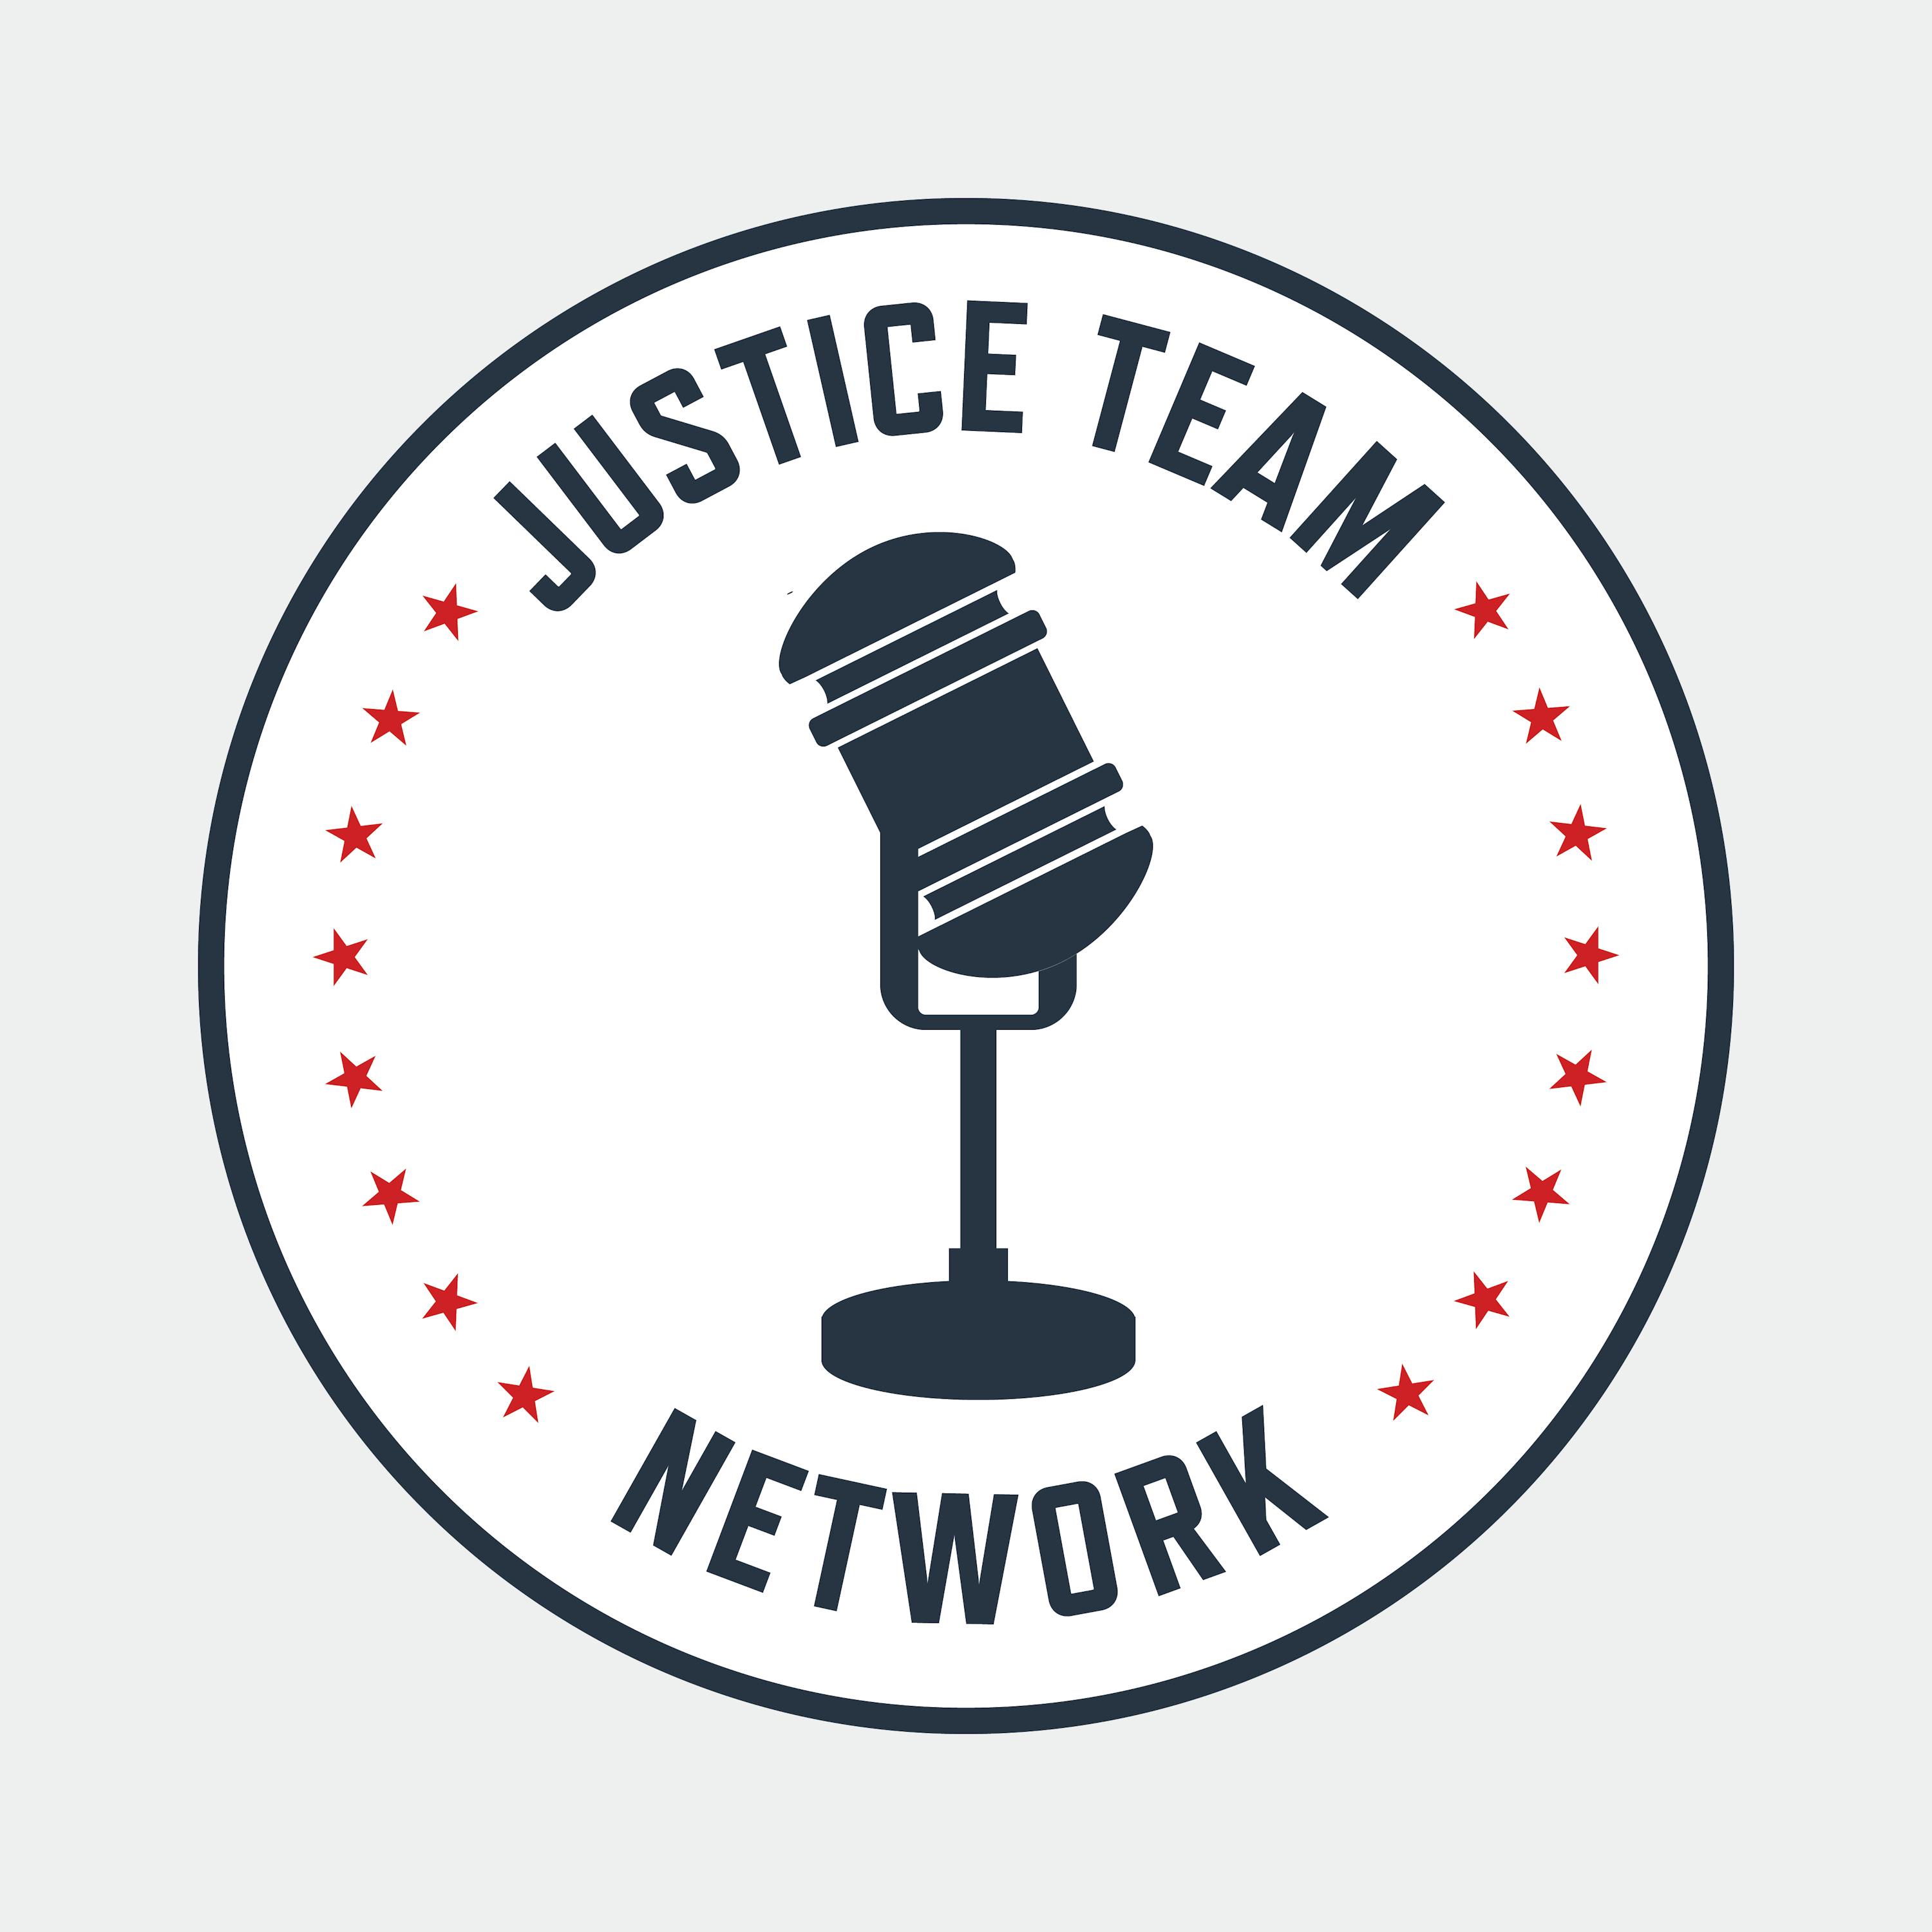 Introducing: The Justice Team Network